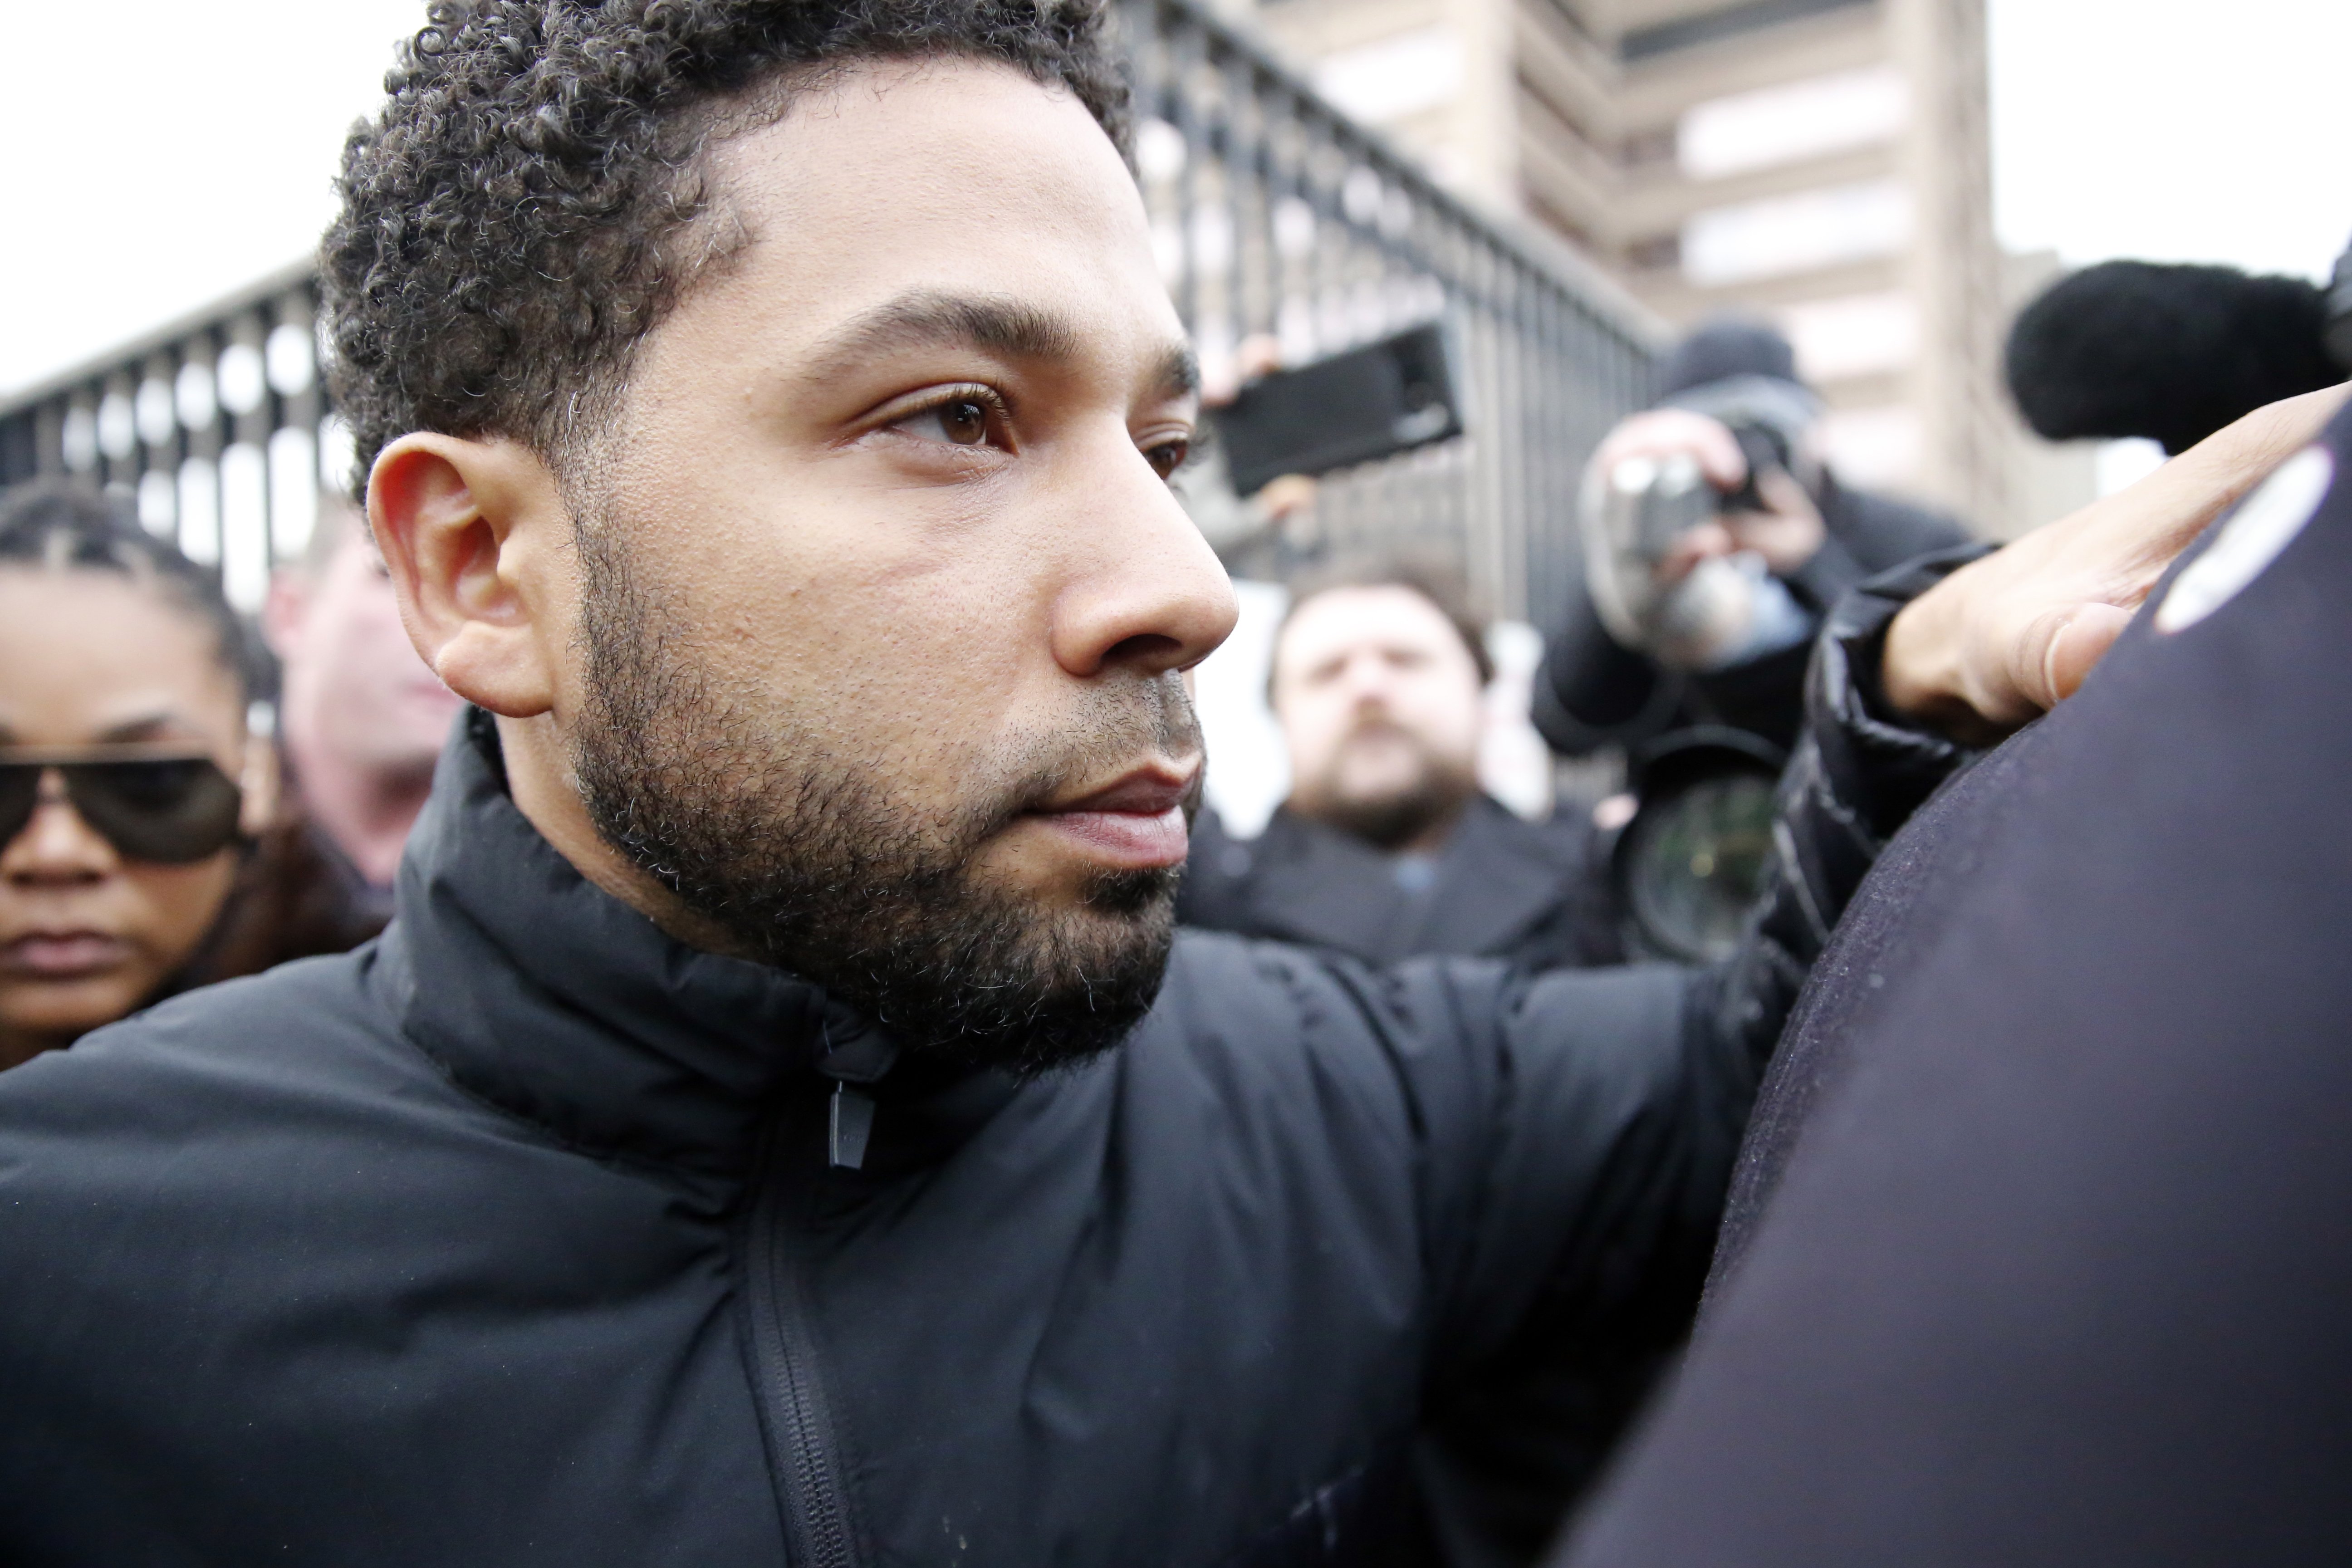 Jussie Smollett leaves Cook County jail after posting bond on February 21, 2019. | Photo: GettyImages